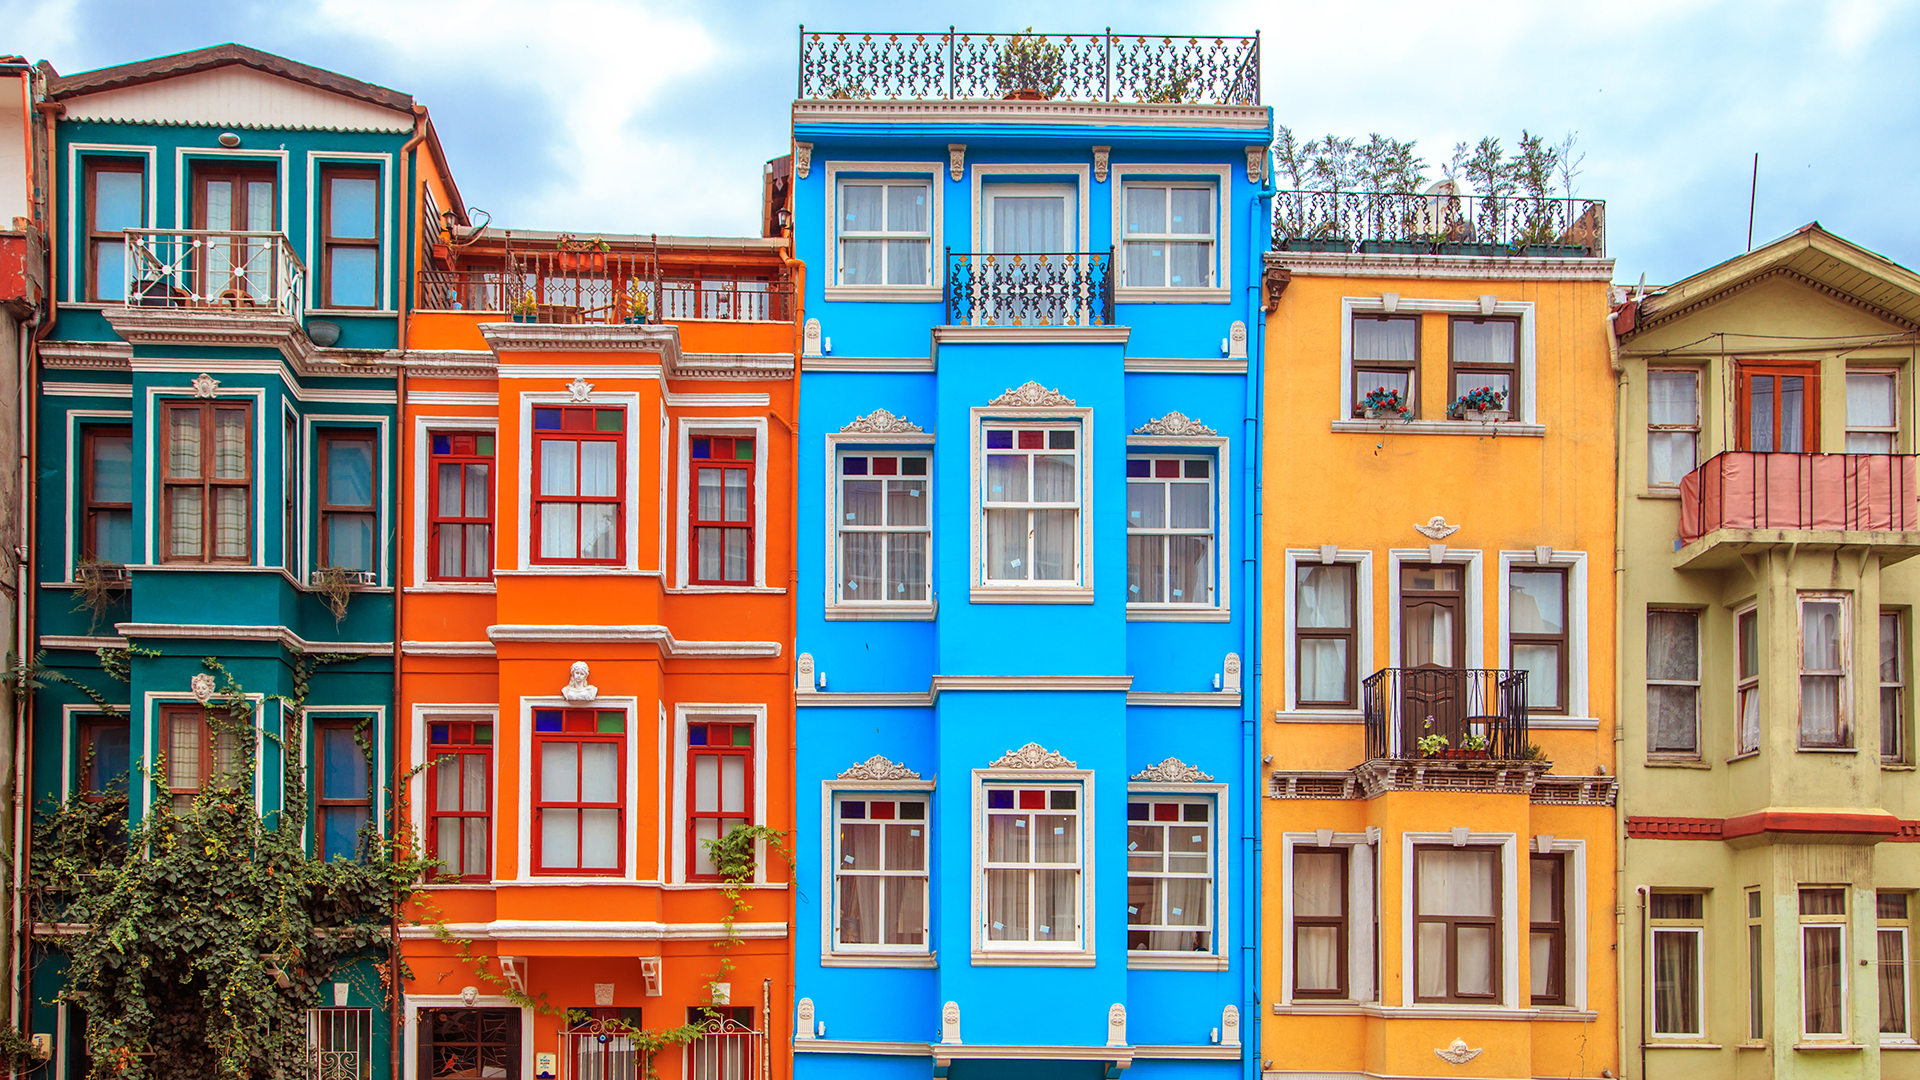 Colorful houses of the Balat district.